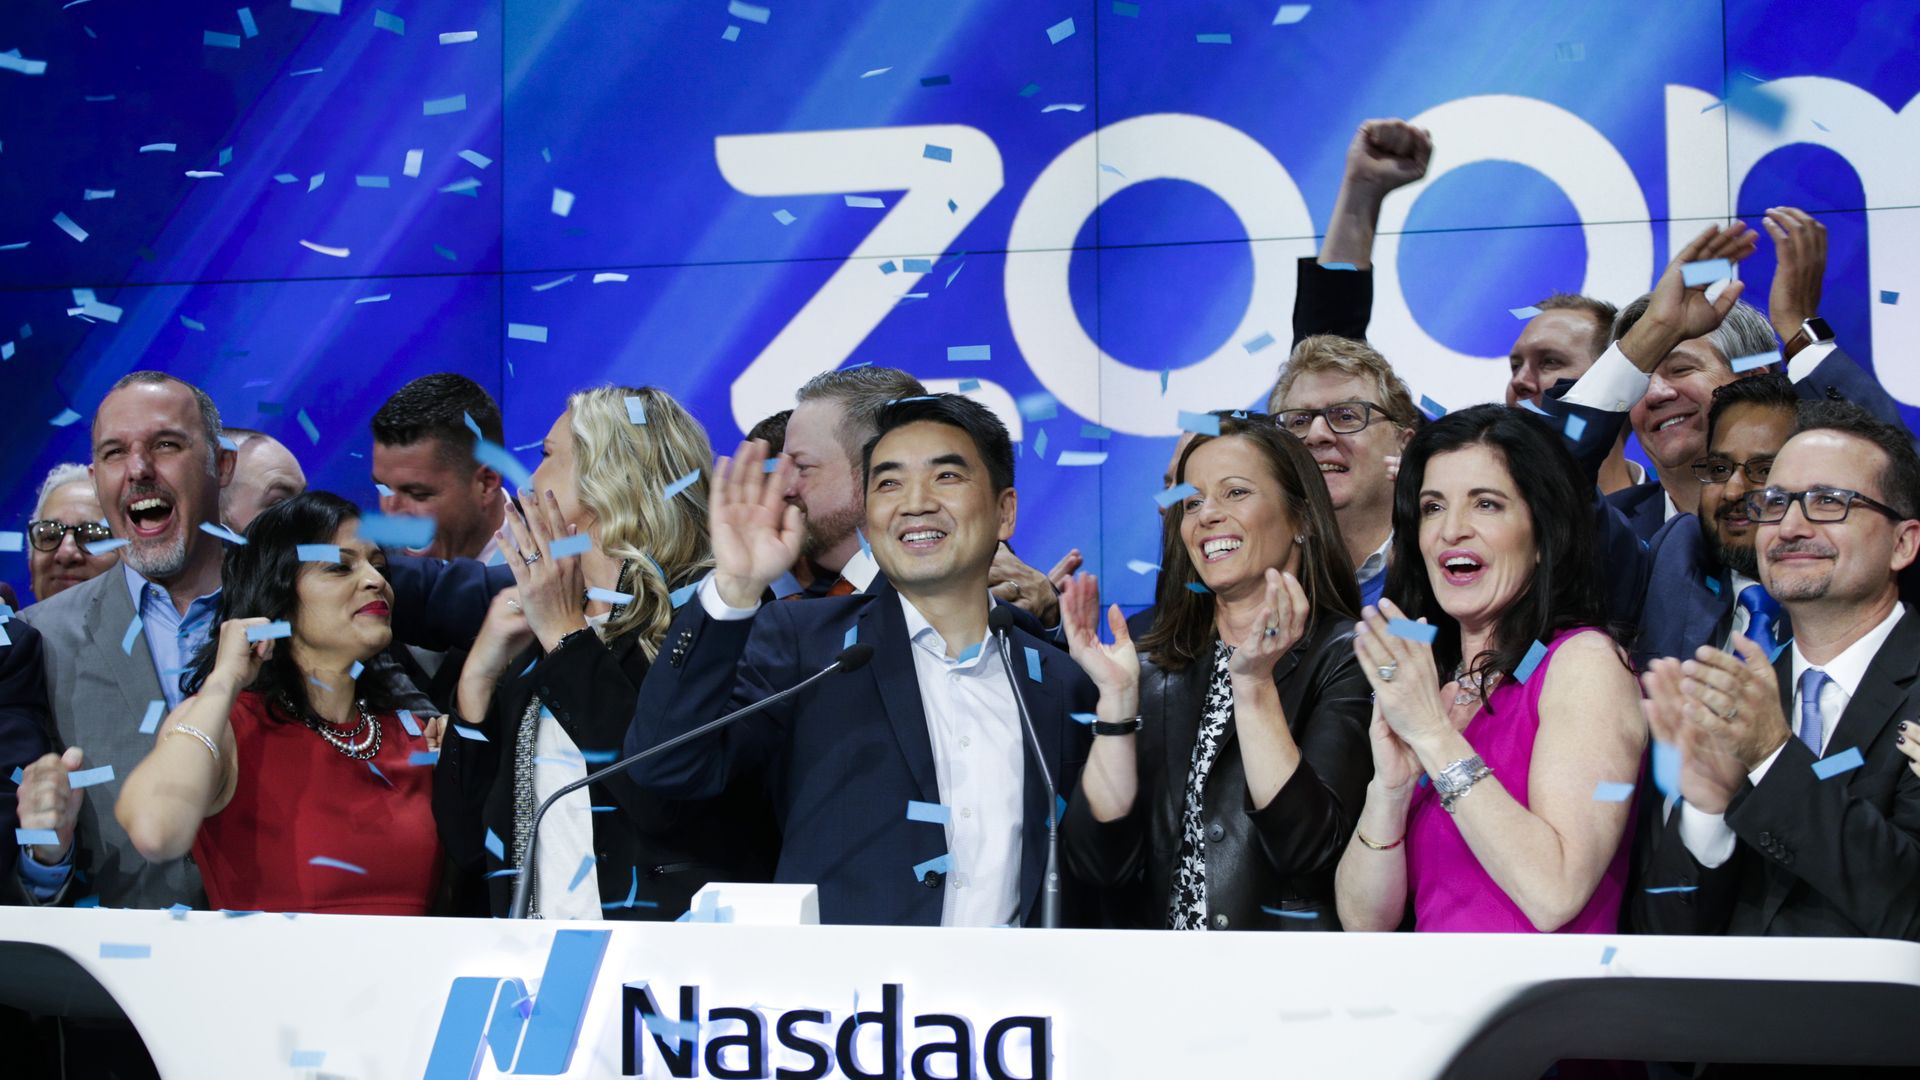 Confetti falls as Zoom founder Eric Yuan rings the Nasdaq opening bell on April 18, 2019 in New York City.